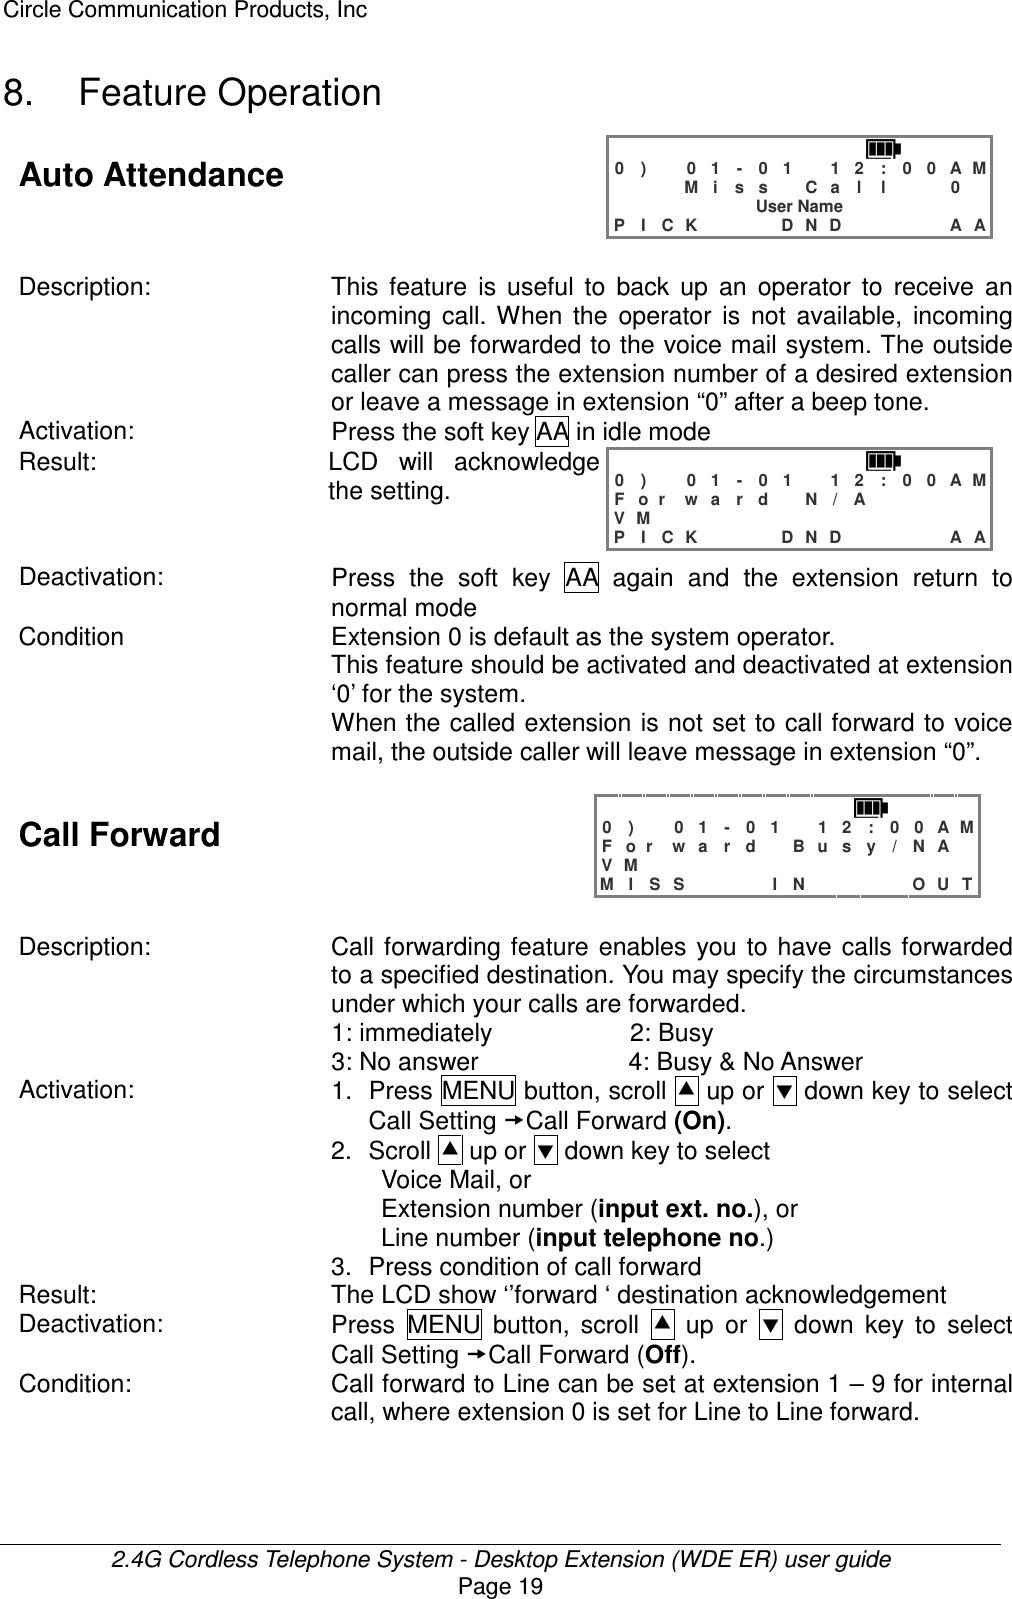 Circle Communication Products, Inc  2.4G Cordless Telephone System - Desktop Extension (WDE ER) user guide Page 19 8.  Feature Operation Auto Attendance   0 )   0 1 - 0 1  1 2 : 0 0 A M    M i s s  C a l l   0  User Name P I C K    D N D     A A  Description: This  feature  is  useful  to  back  up  an  operator  to  receive  an incoming call.  When  the  operator  is  not  available,  incoming calls will be forwarded to the voice mail system. The outside caller can press the extension number of a desired extension or leave a message in extension “0” after a beep tone. Activation:  Press the soft key AA in idle mode Result: LCD  will  acknowledge the setting.   0 )   0 1 - 0 1  1 2 : 0 0 A M F o r w a r d  N / A      V M               P I C K    D N D     A A  Deactivation:  Press  the  soft  key  AA  again  and  the extension  return  to normal mode Condition    Extension 0 is default as the system operator. This feature should be activated and deactivated at extension ‘0’ for the system. When the called extension is not set to call forward to voice mail, the outside caller will leave message in extension “0”.  Call Forward   0 )   0 1 - 0 1  1 2 : 0 0 A M F o r w a r d  B u s y / N A  V M               M I S S    I N     O U T  Description:  Call  forwarding feature  enables  you  to have calls forwarded to a specified destination. You may specify the circumstances under which your calls are forwarded.   1: immediately                      2: Busy 3: No answer                        4: Busy &amp; No Answer Activation:  1.  Press MENU button, scroll  up or  down key to select Call Setting Call Forward (On). 2.  Scroll  up or  down key to select   Voice Mail, or Extension number (input ext. no.), or   Line number (input telephone no.) 3.  Press condition of call forward   Result:  The LCD show ‘’forward ‘ destination acknowledgement Deactivation:  Press  MENU  button,  scroll    up  or    down  key  to  select Call Setting Call Forward (Off). Condition:  Call forward to Line can be set at extension 1 – 9 for internal call, where extension 0 is set for Line to Line forward.  